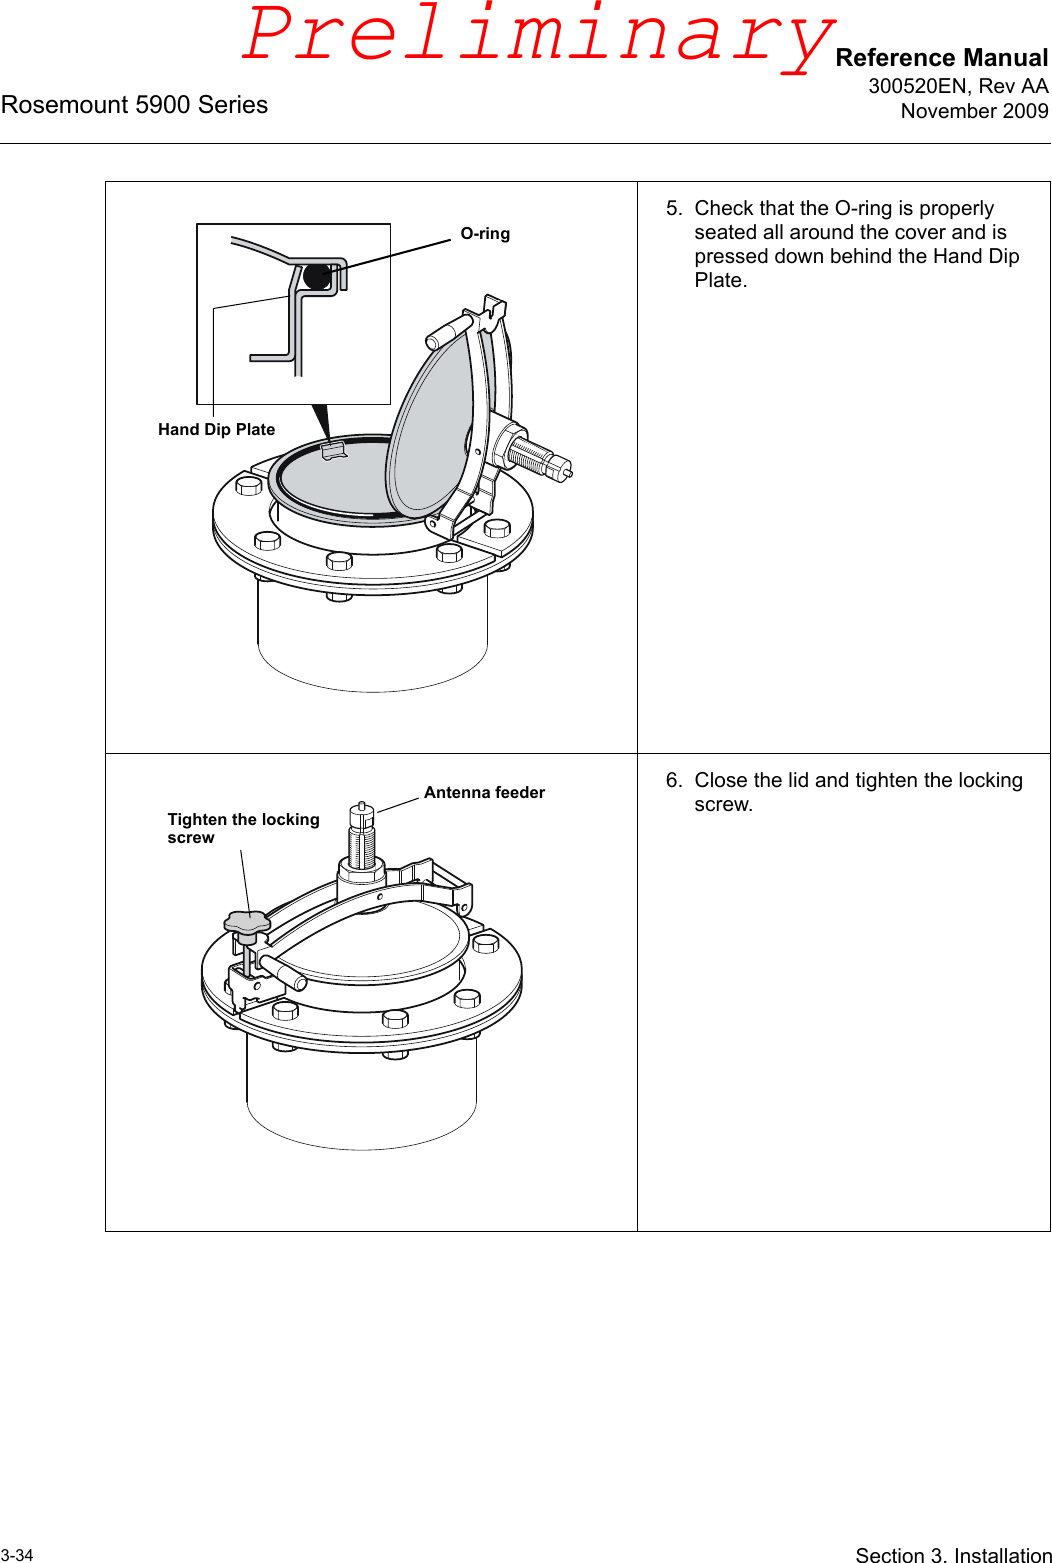 Reference Manual300520EN, Rev AANovember 2009Rosemount 5900 Series3-34 Section 3. Installation5. Check that the O-ring is properly seated all around the cover and is pressed down behind the Hand Dip Plate.6. Close the lid and tighten the locking screw.O-ringHand Dip PlateTighten the locking screwAntenna feederPreliminary